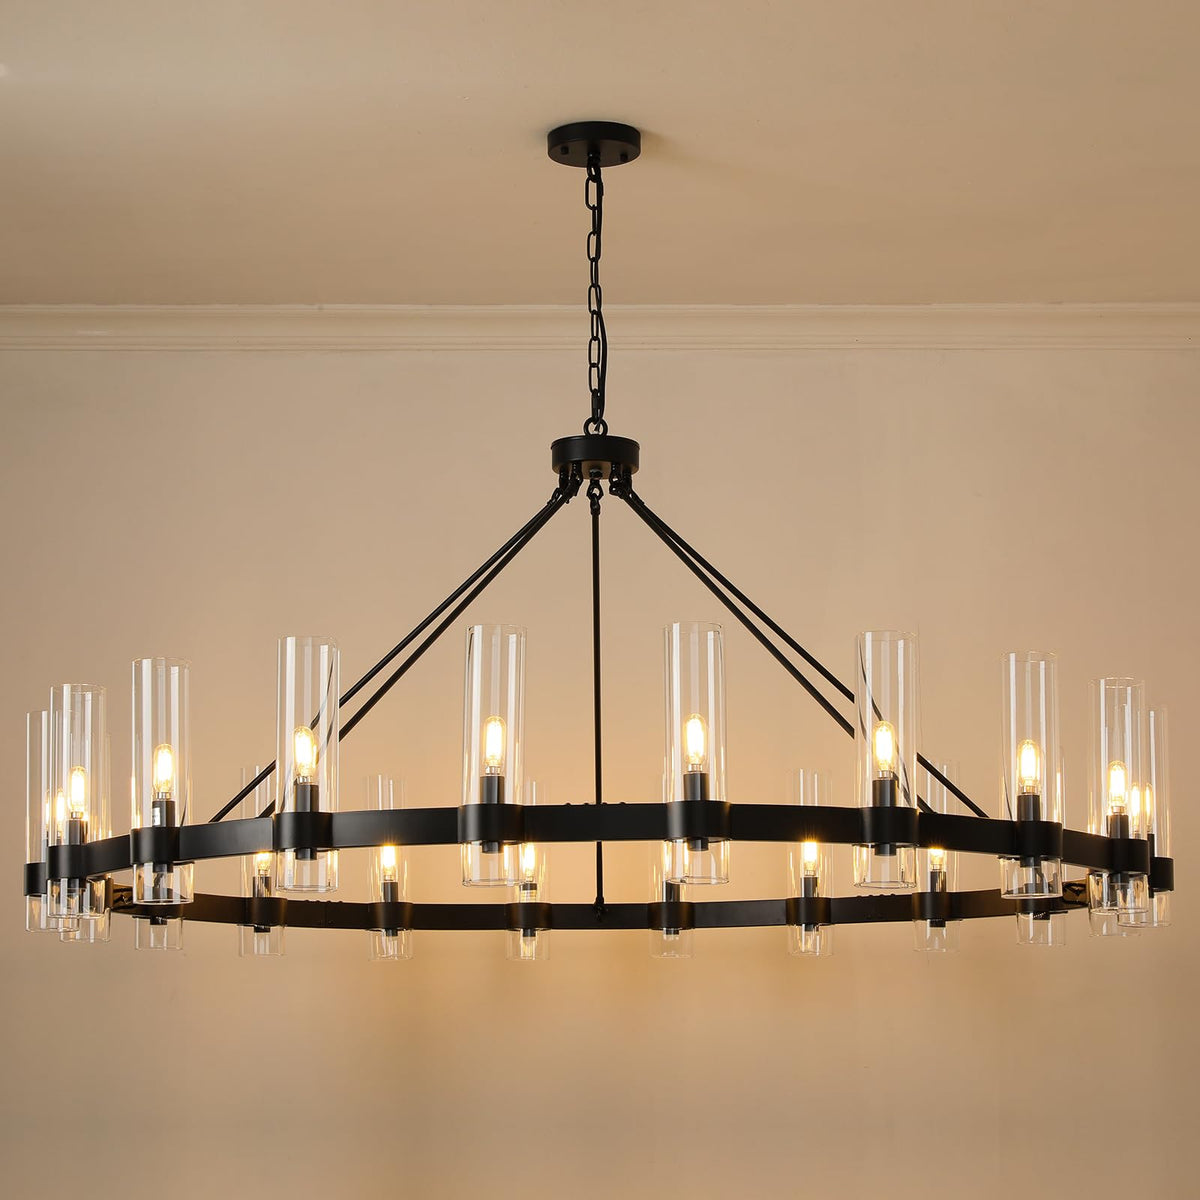 20-Lights Black Chandelier,Wagon Wheel Chandelier with Glass Shade, 60 Inch Large Round Industrial High Ceilings Pendant Lighting Fixture for Dining Living Room, Kitchen Island, Foyer